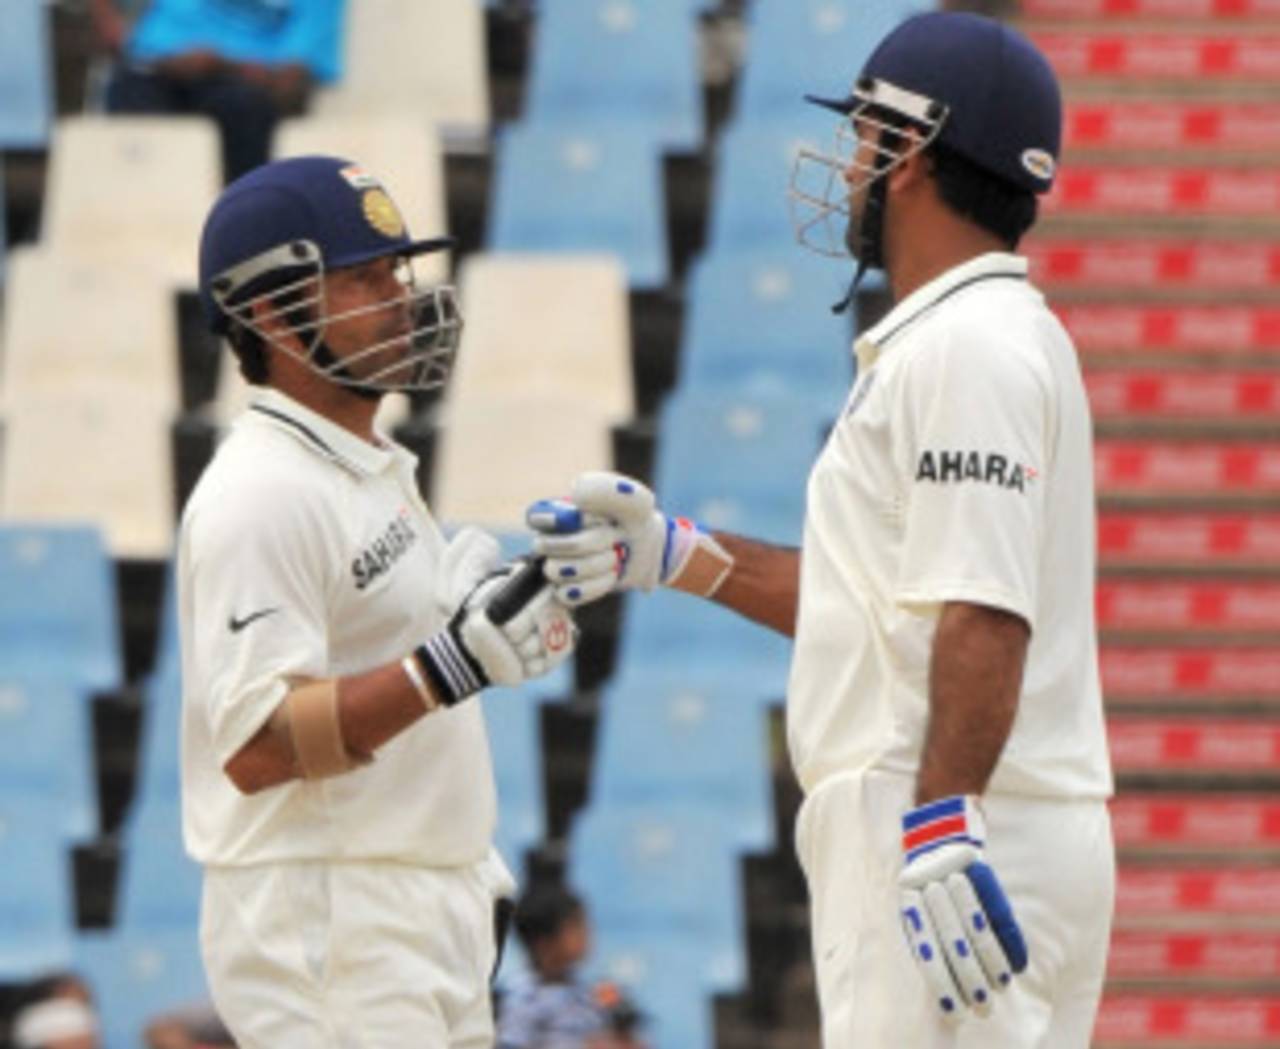 Sachin Tendulkar and MS Dhoni guided India through to tea, South Africa v India, 1st Test, Centurion, 4th day, December 19, 2010